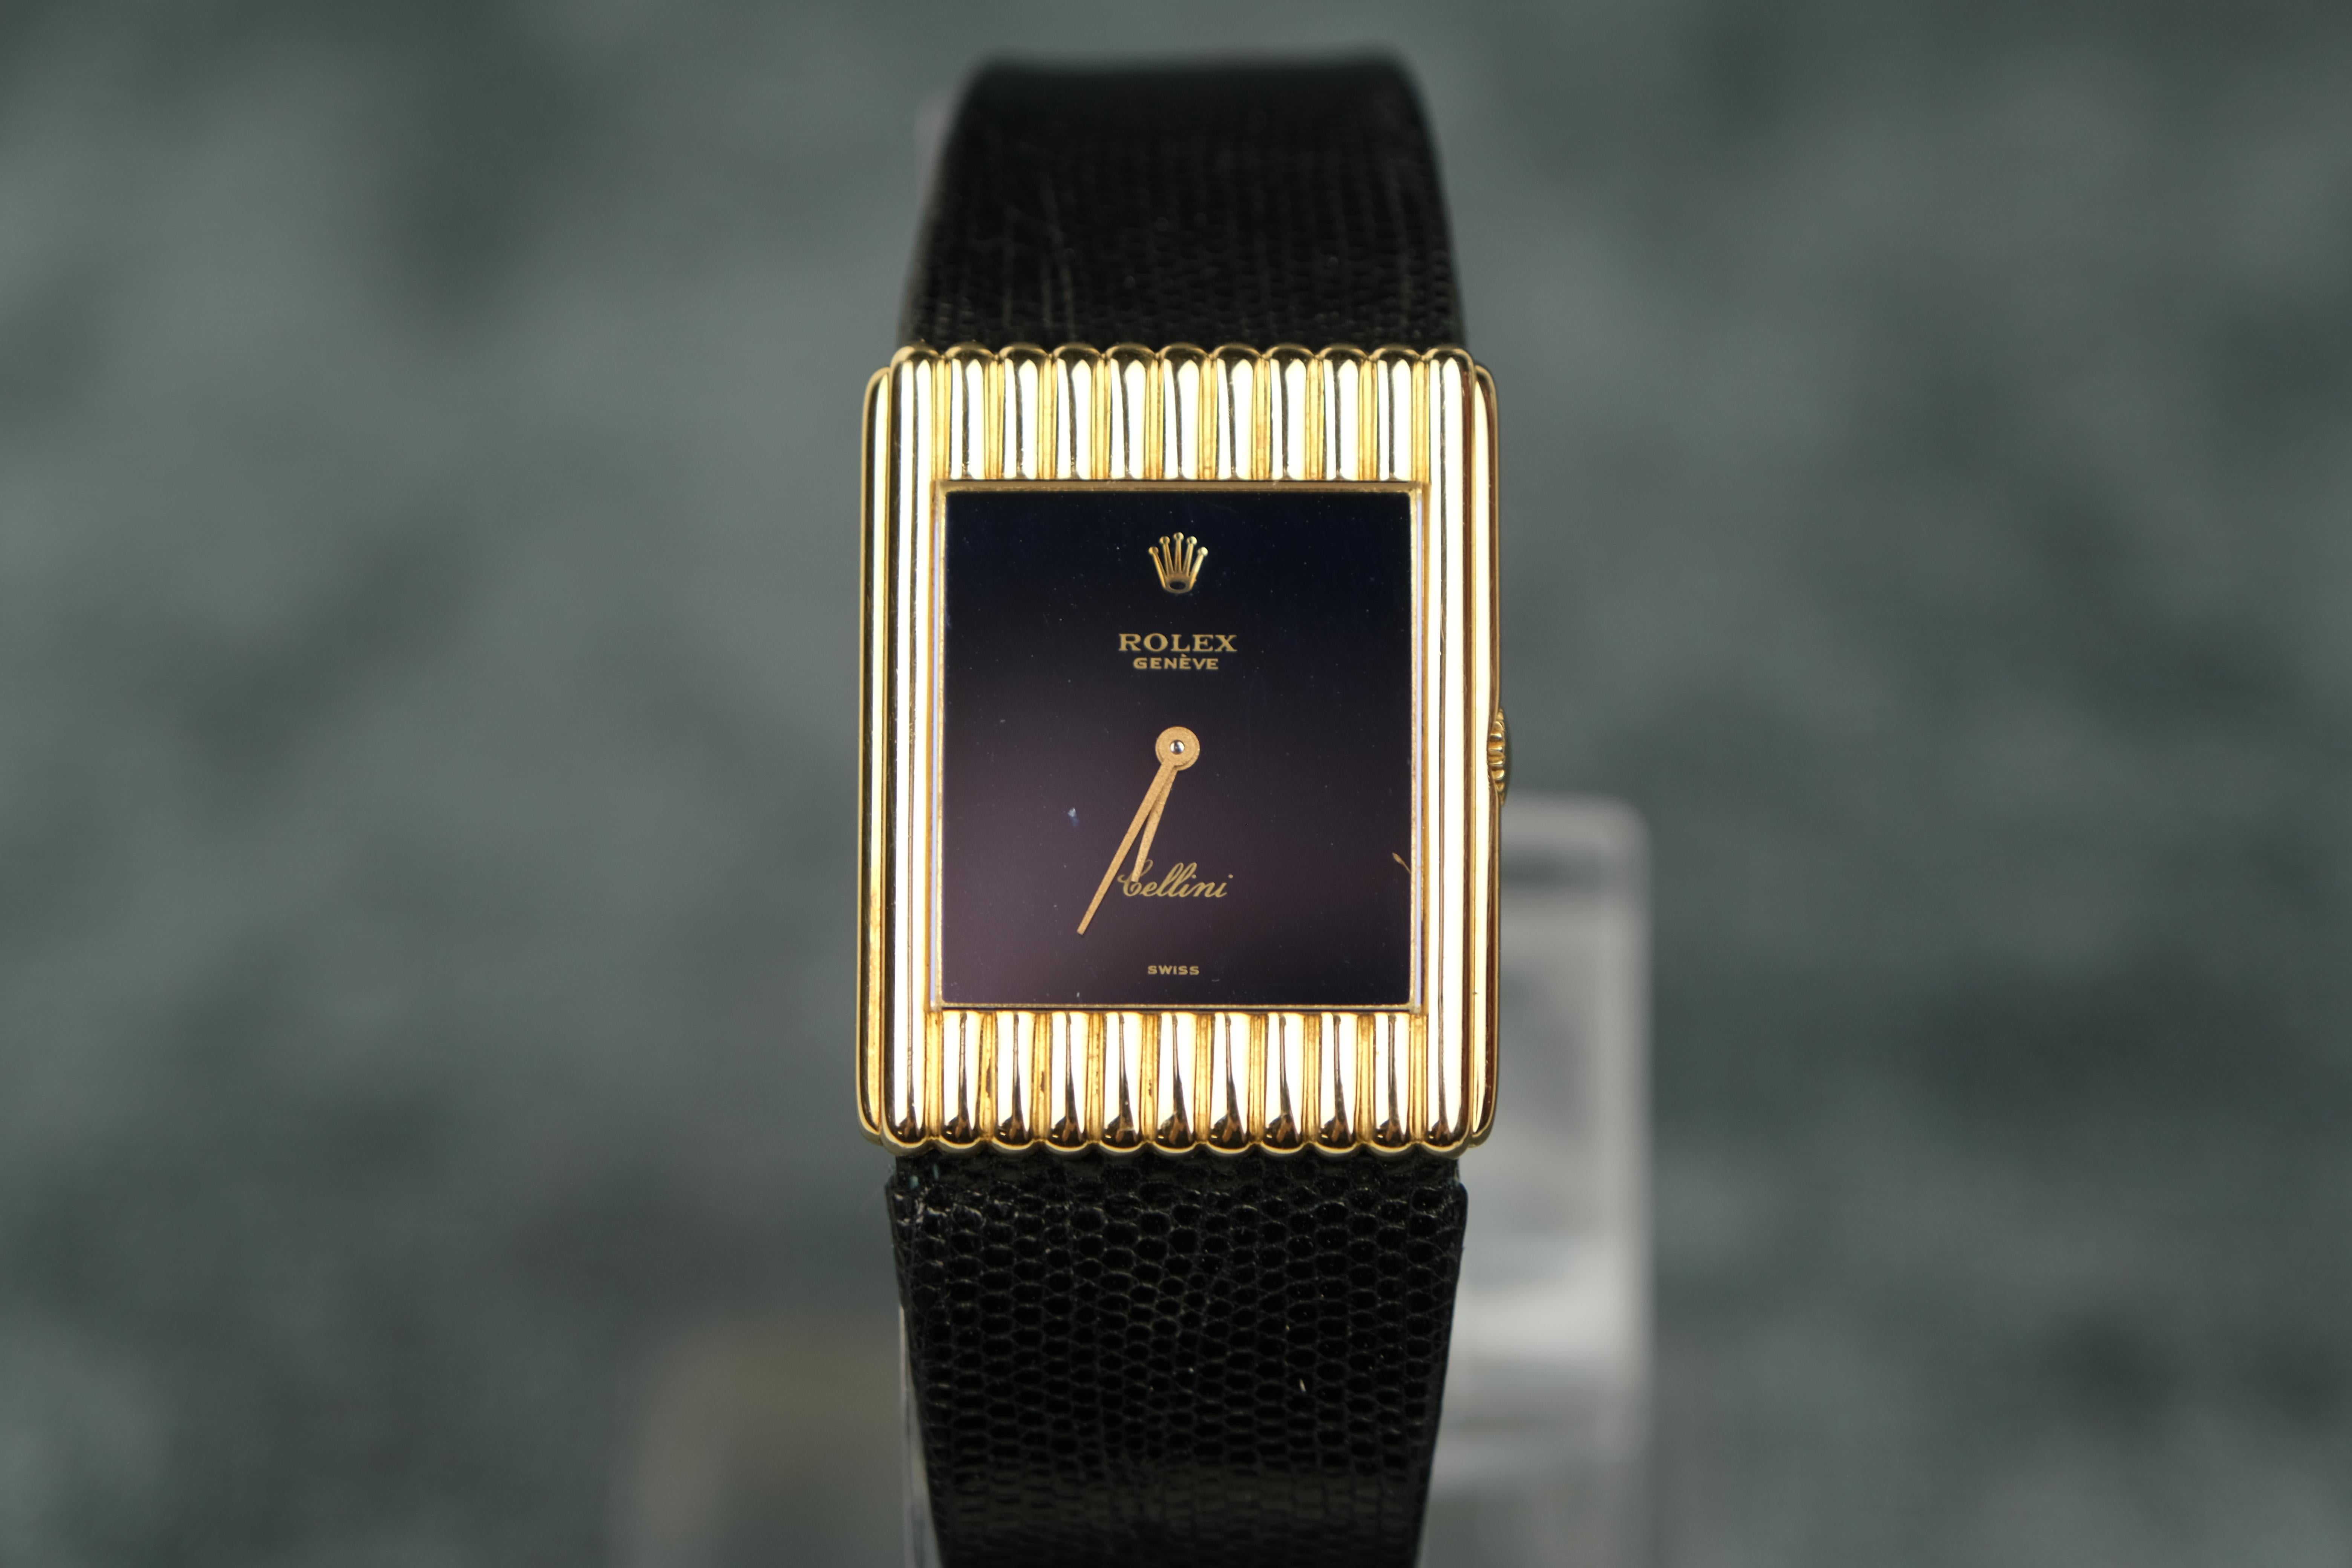 Rolex Cellini 18K Gold Stem Wind Wristwatch

A luxury timepiece with a tank-style 18K yellow gold bezel that frames a navy blue dial with Rolex hallmark crown and gold-tone baton-style hands.

This elegant watch also features an 18K yellow gold case